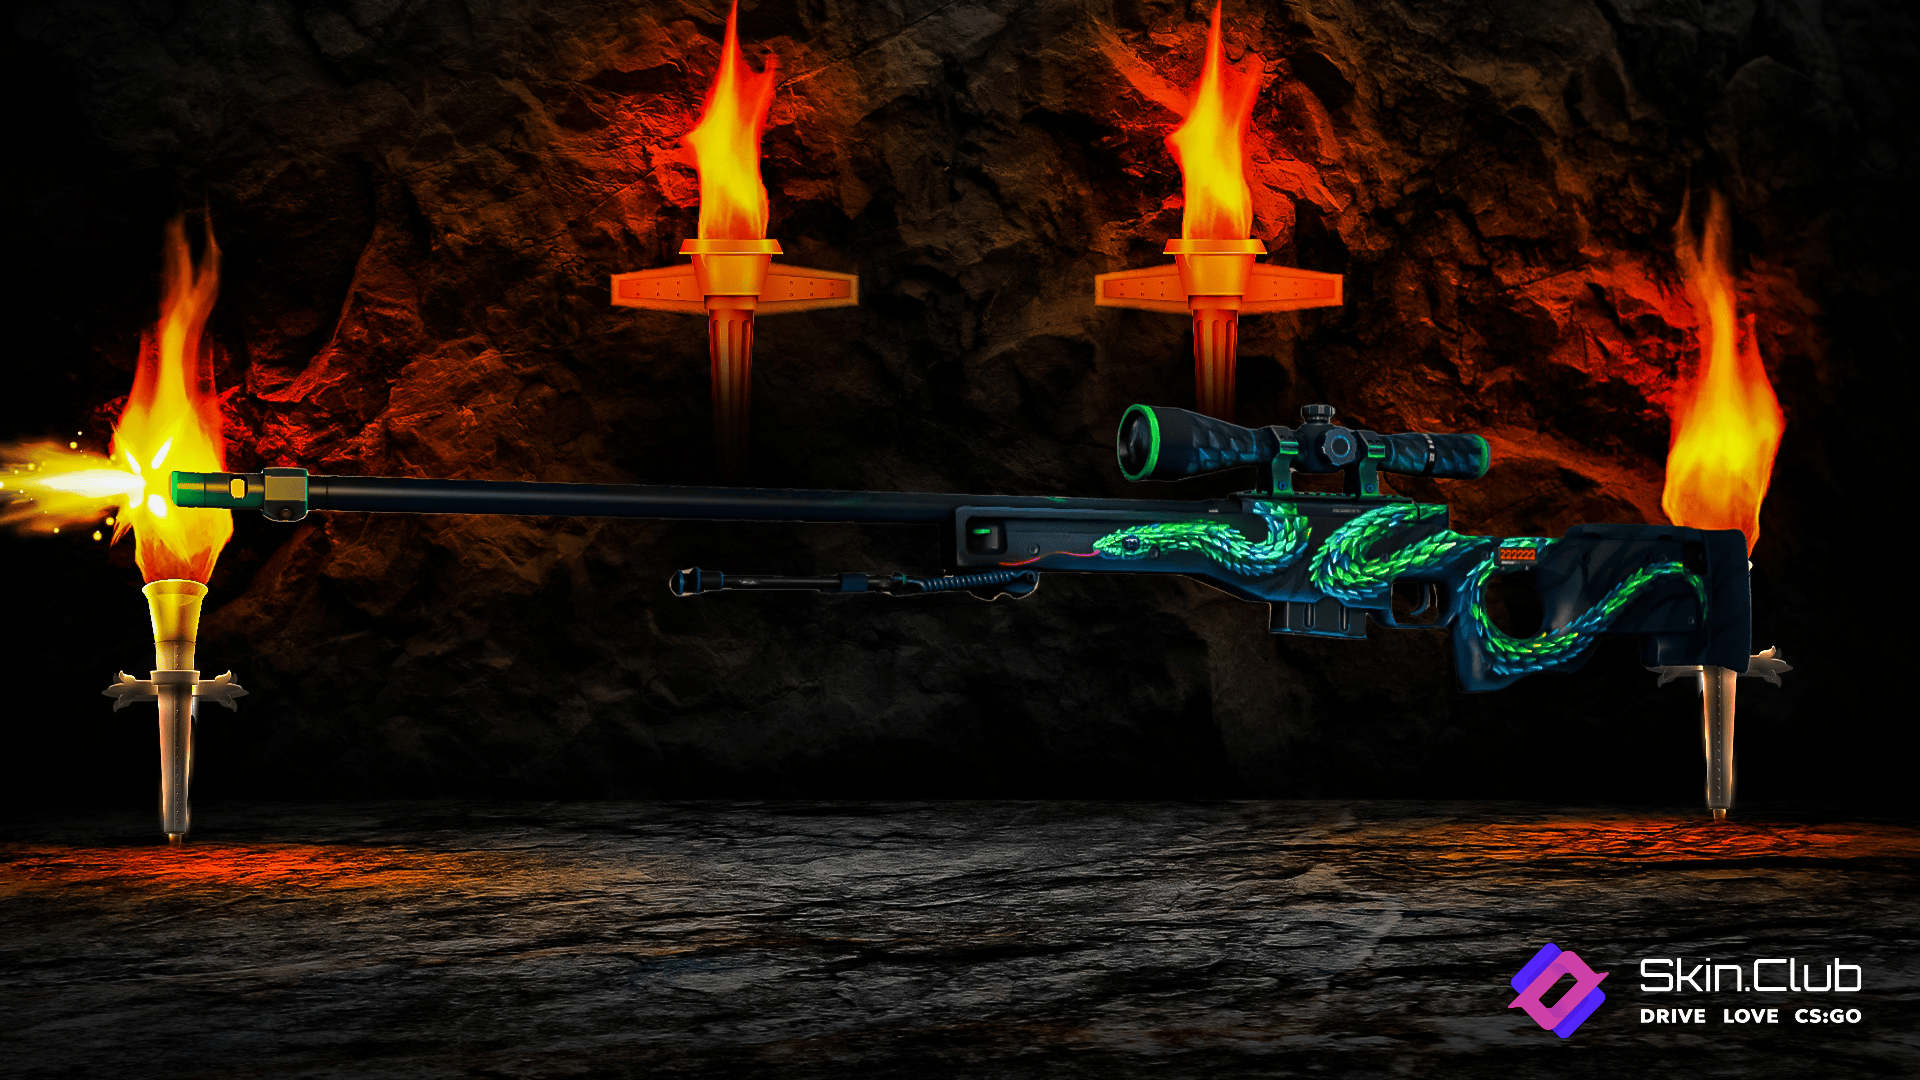 Just crafted this: ~Stattrak FN Atheris